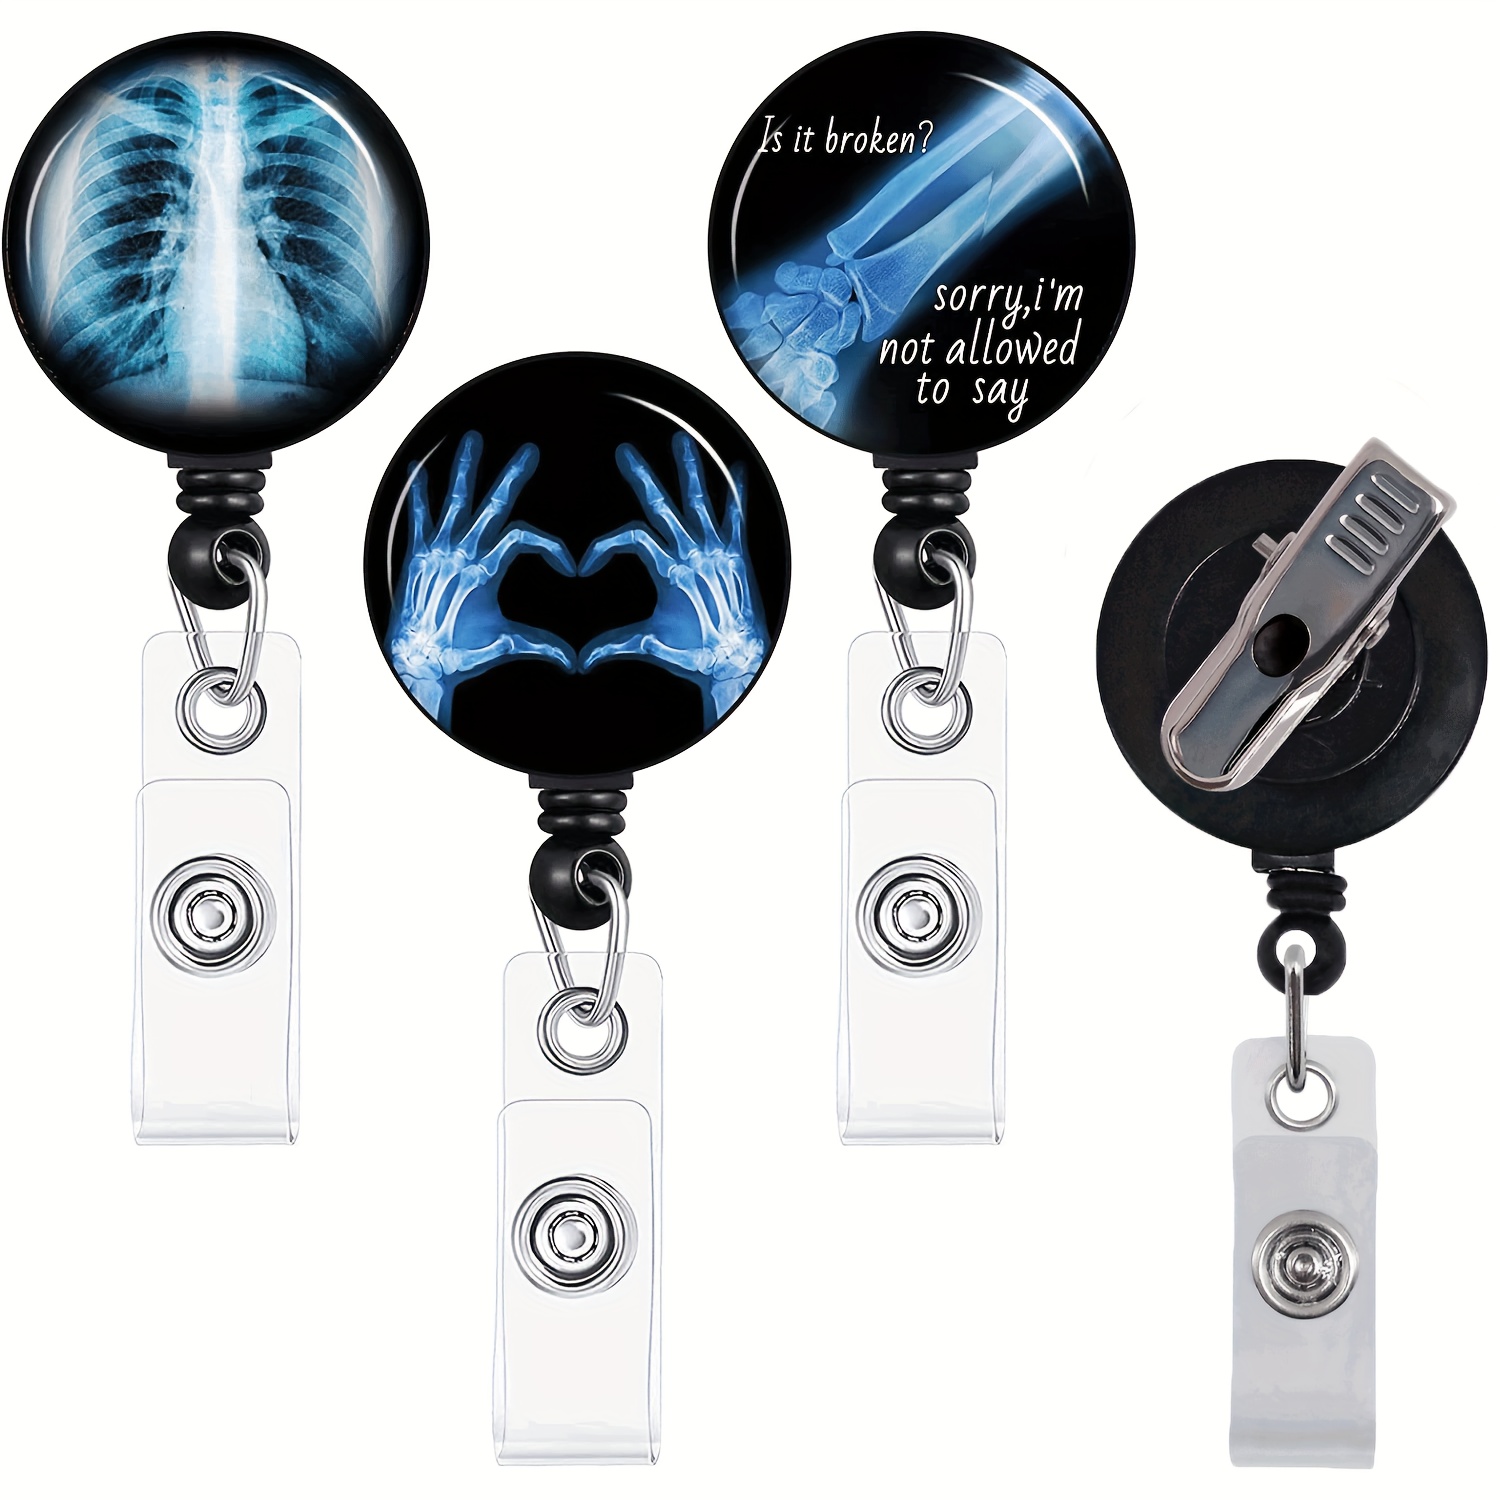  Badge Reels Holder Retractable Keychain Heavy Duty with ID  Clip for Nurse Key Card Name Tag Mental Health Matters Psychology Medical  Work Office Key Retractor Leash Metal Carabiner Belt Clip 